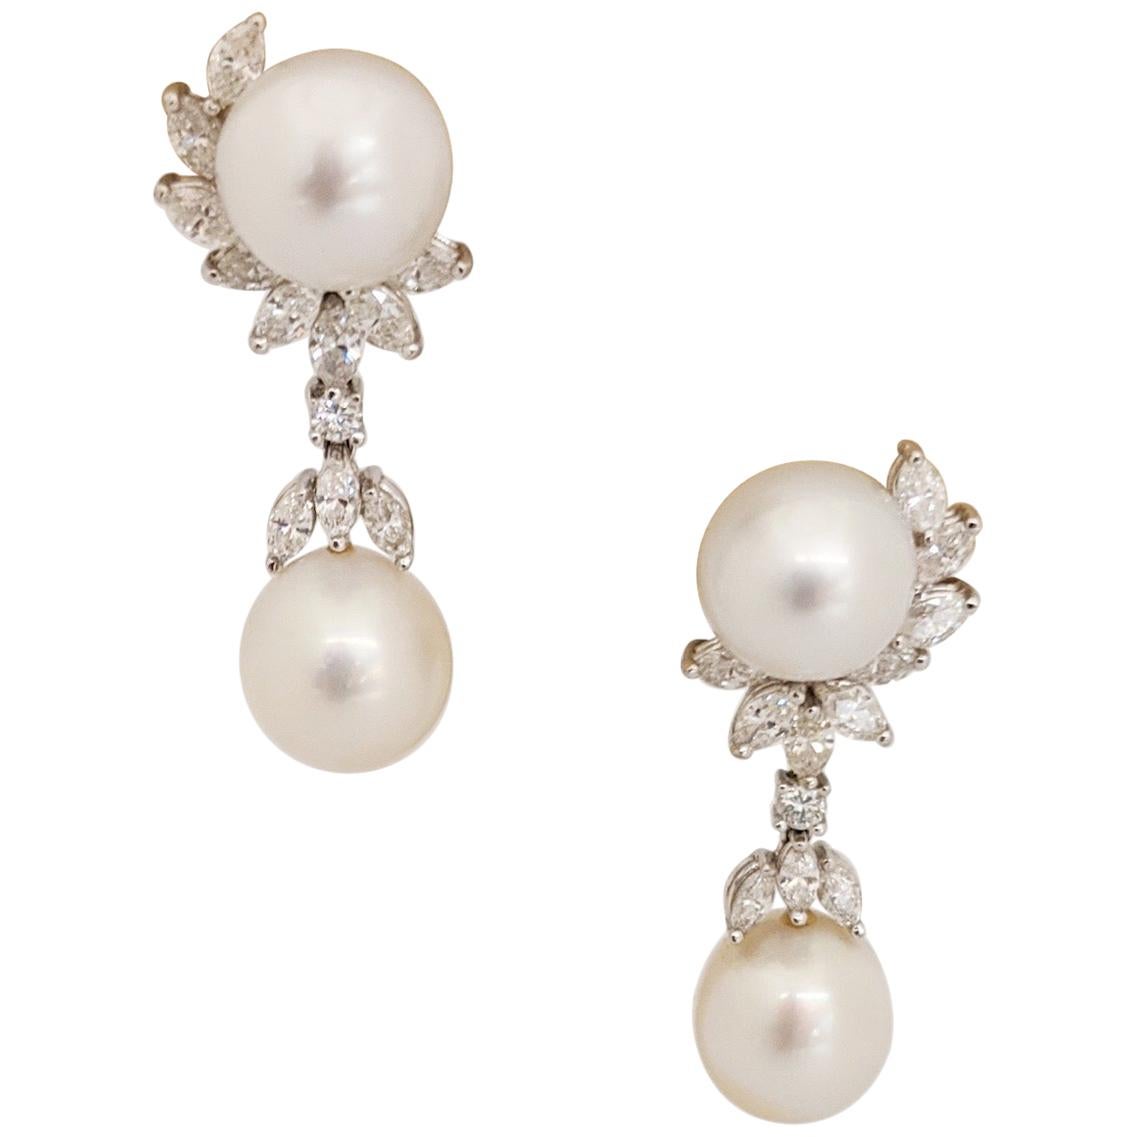 Platinum and 18kt White Gold Earrings with South Sea Pearls and 3.07ct Diamonds